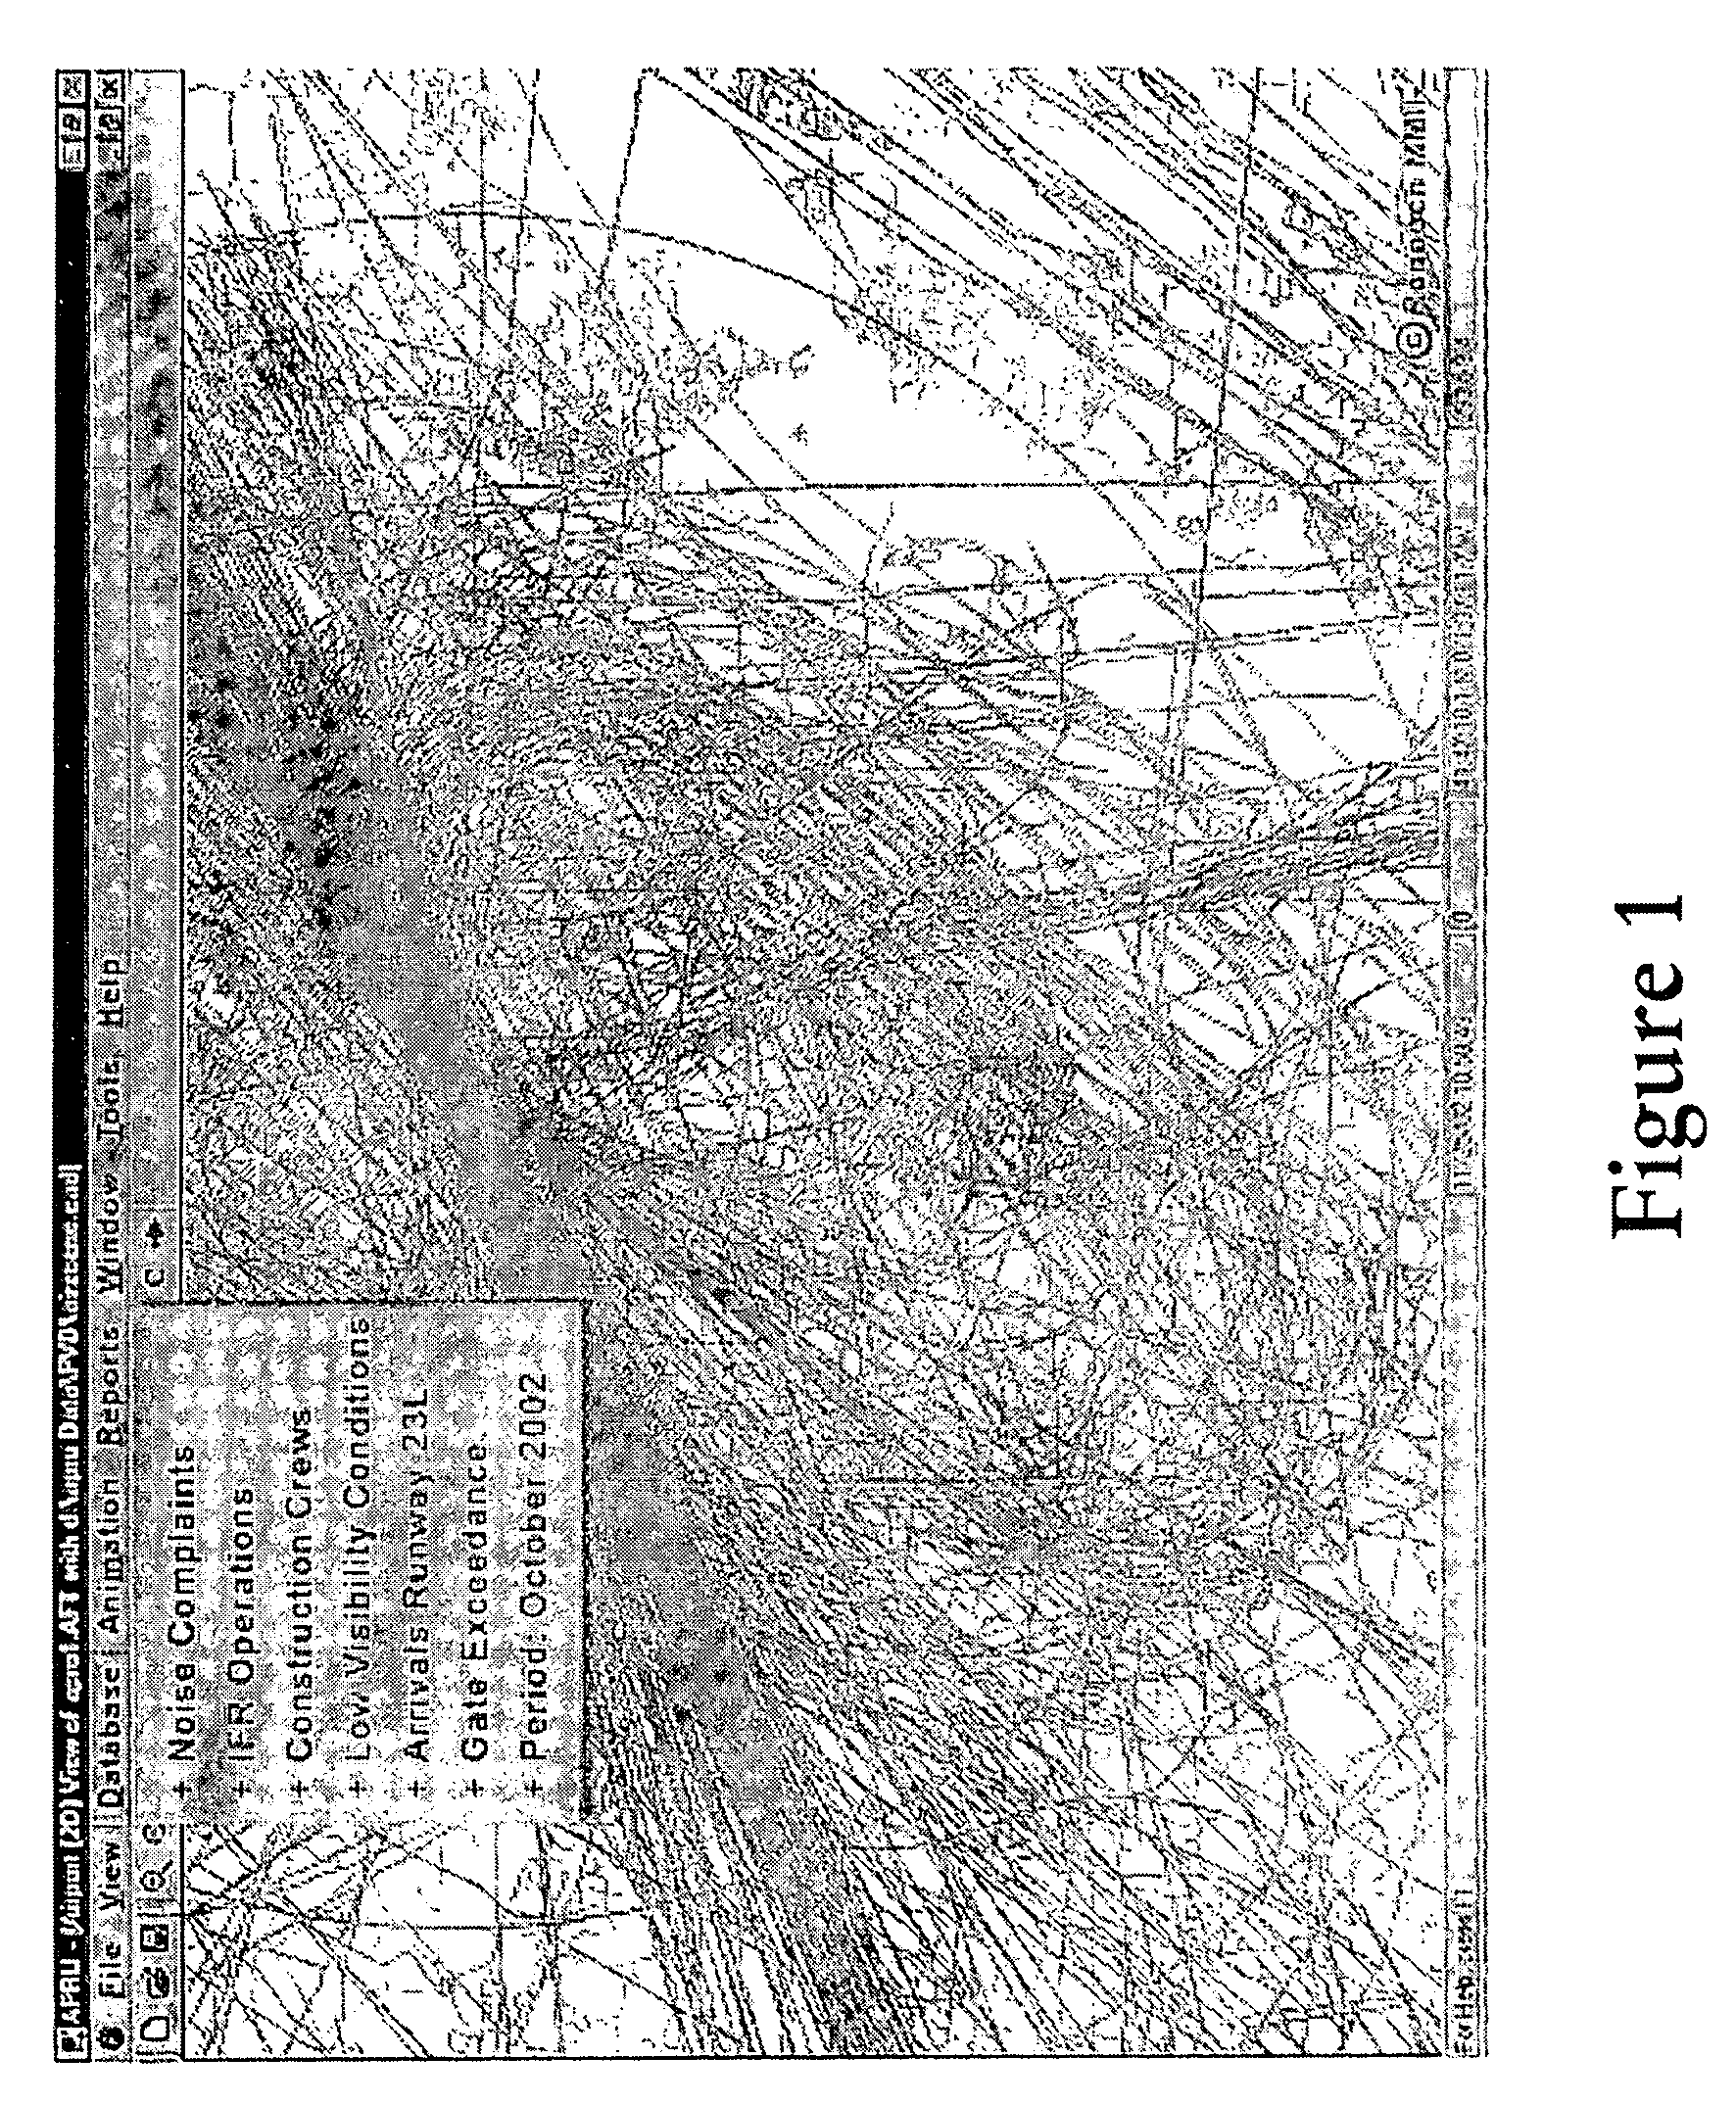 Method and apparatus to correlate aircraft flight tracks and events with relevant airport operations information